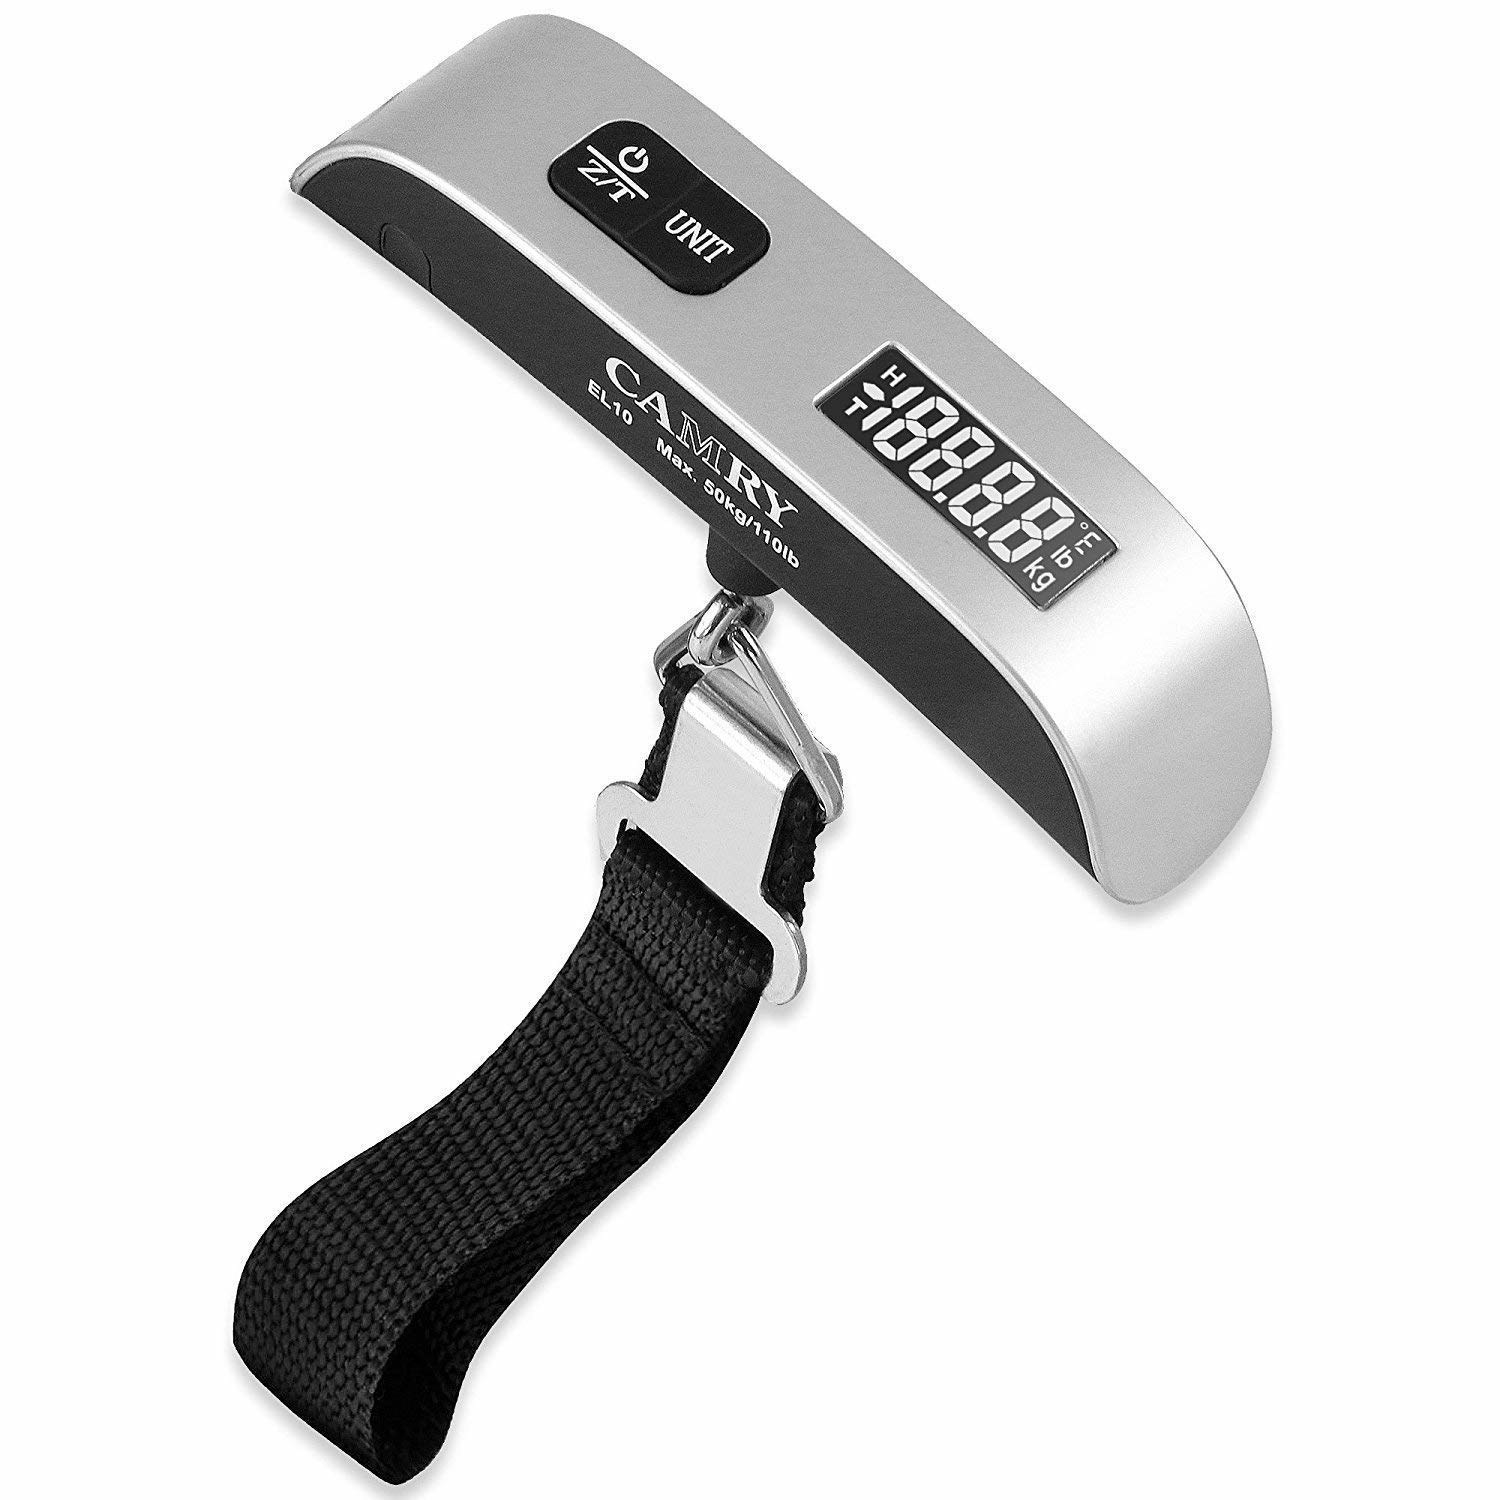 The luggage scale